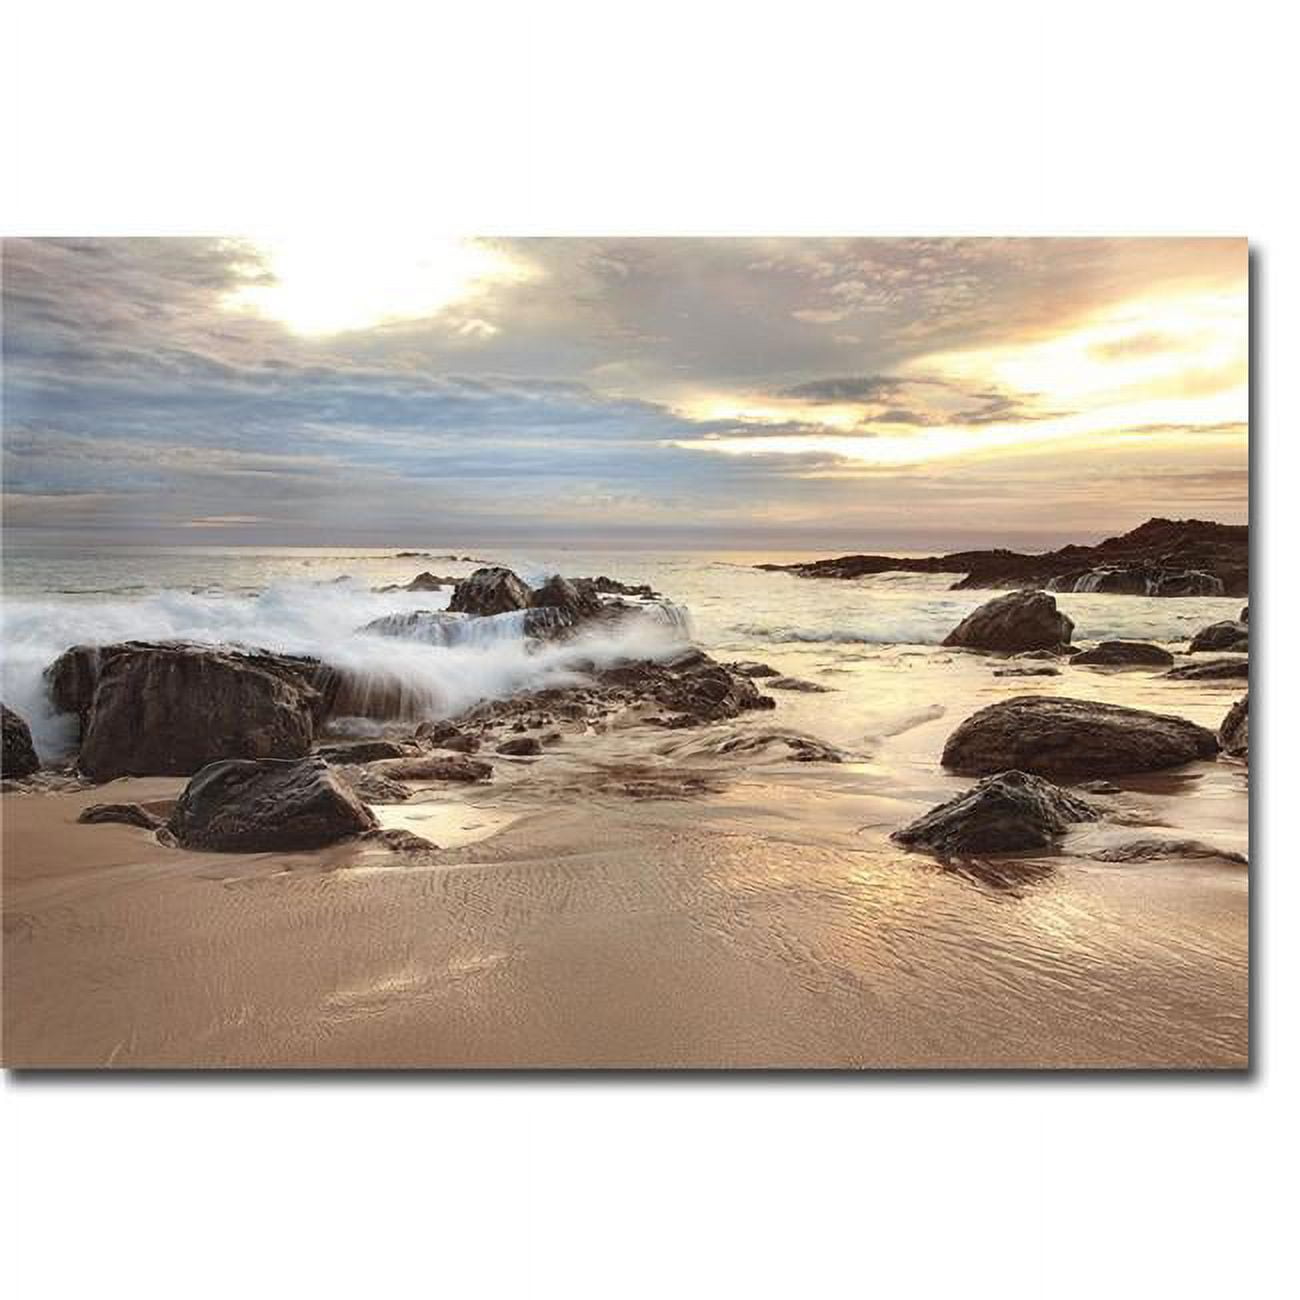 1624e875cg Laguna Sunset By Janel Pahl Premium Gallery-wrapped Canvas Giclee Art - 16 X 24 X 1.5 In.